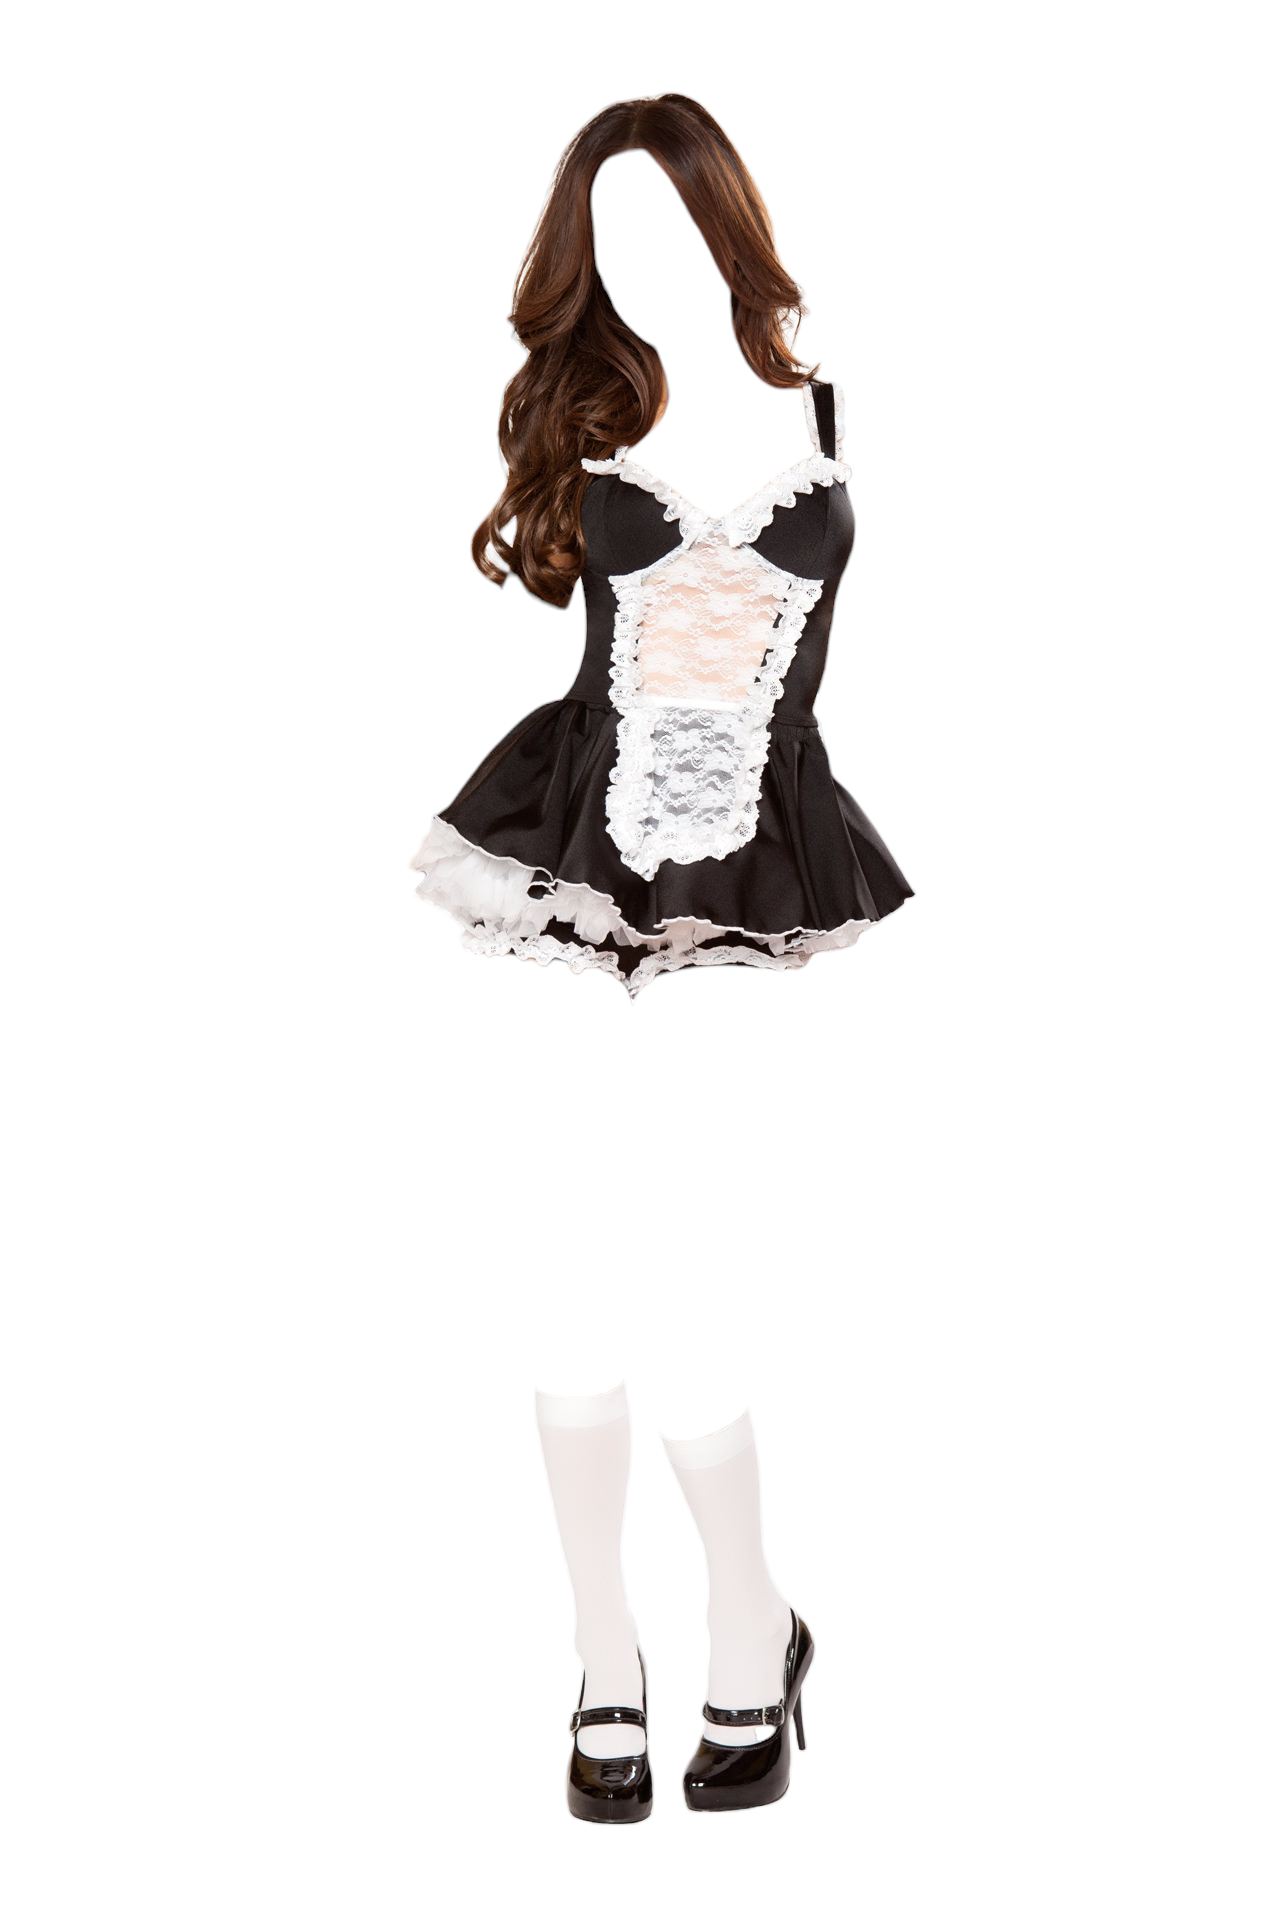 Roma Costume 4 PC Maid You Do It Top & Skirt Black/White